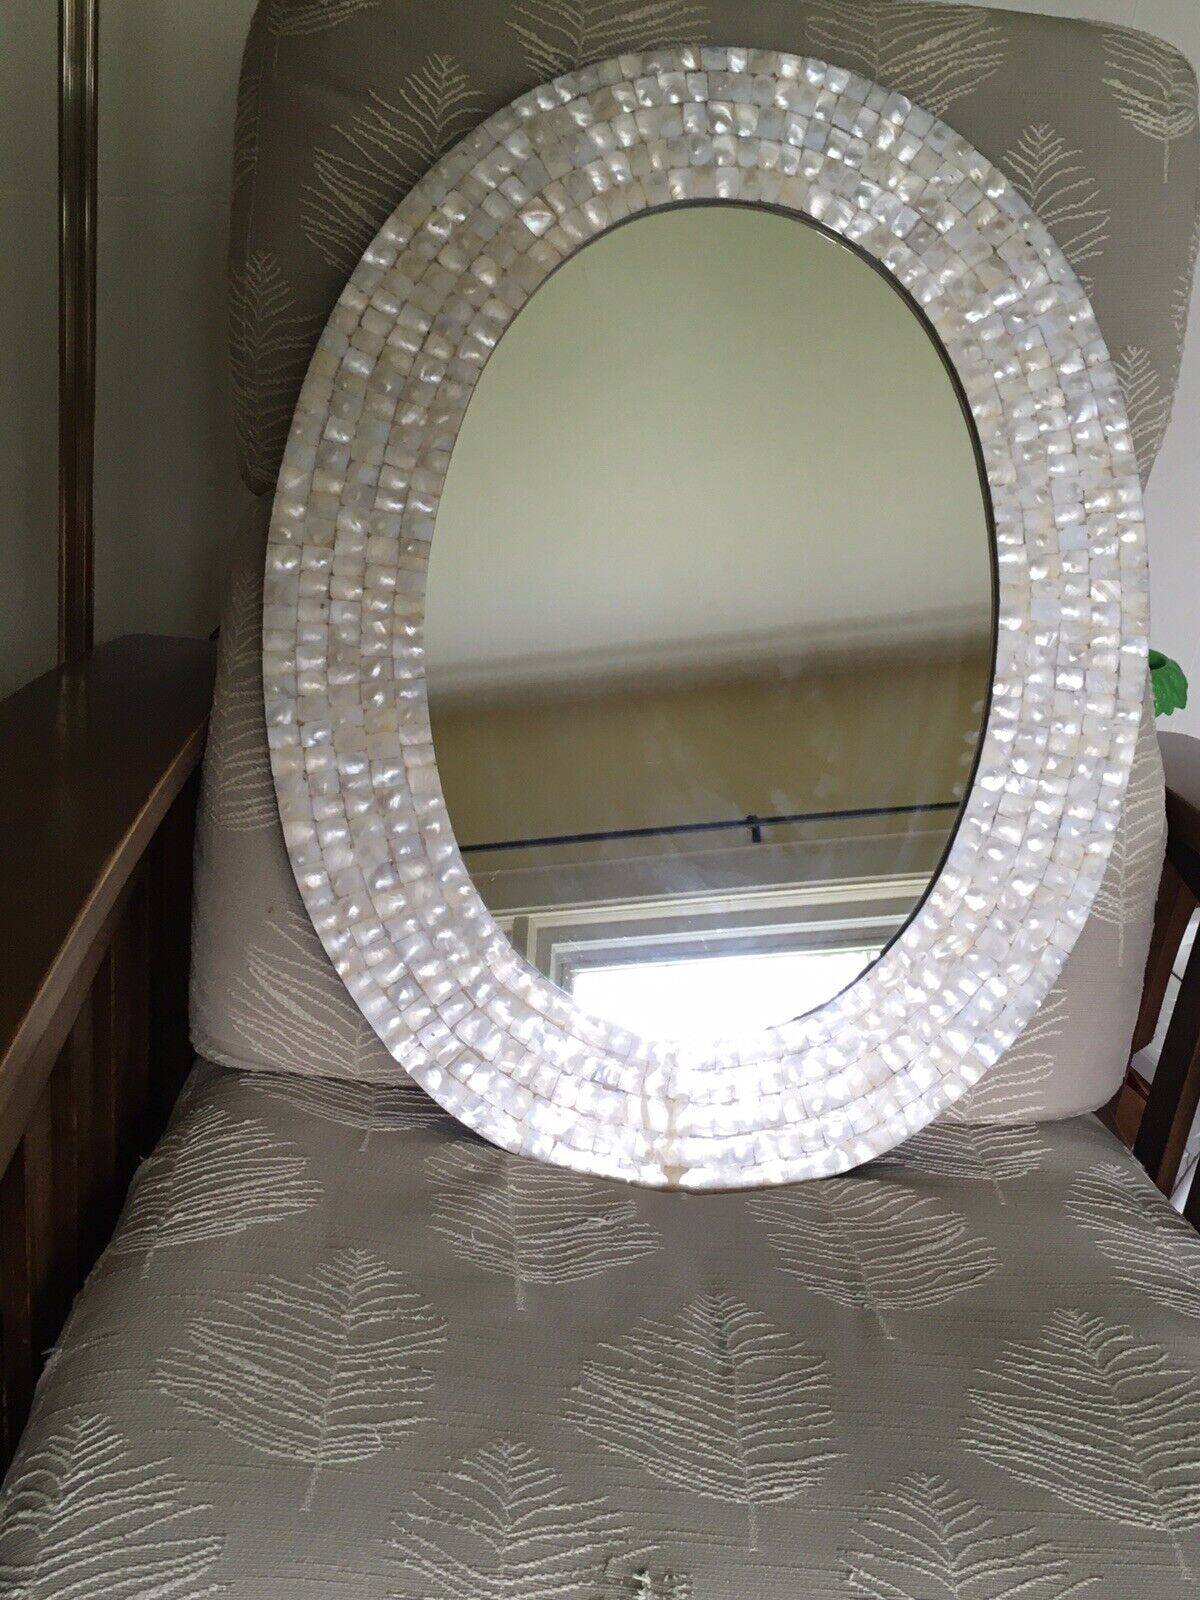 Max 90% OFF Handmade Mother of Pearl Mirror Frame E $749 At the price of surprise Retails Design Oval